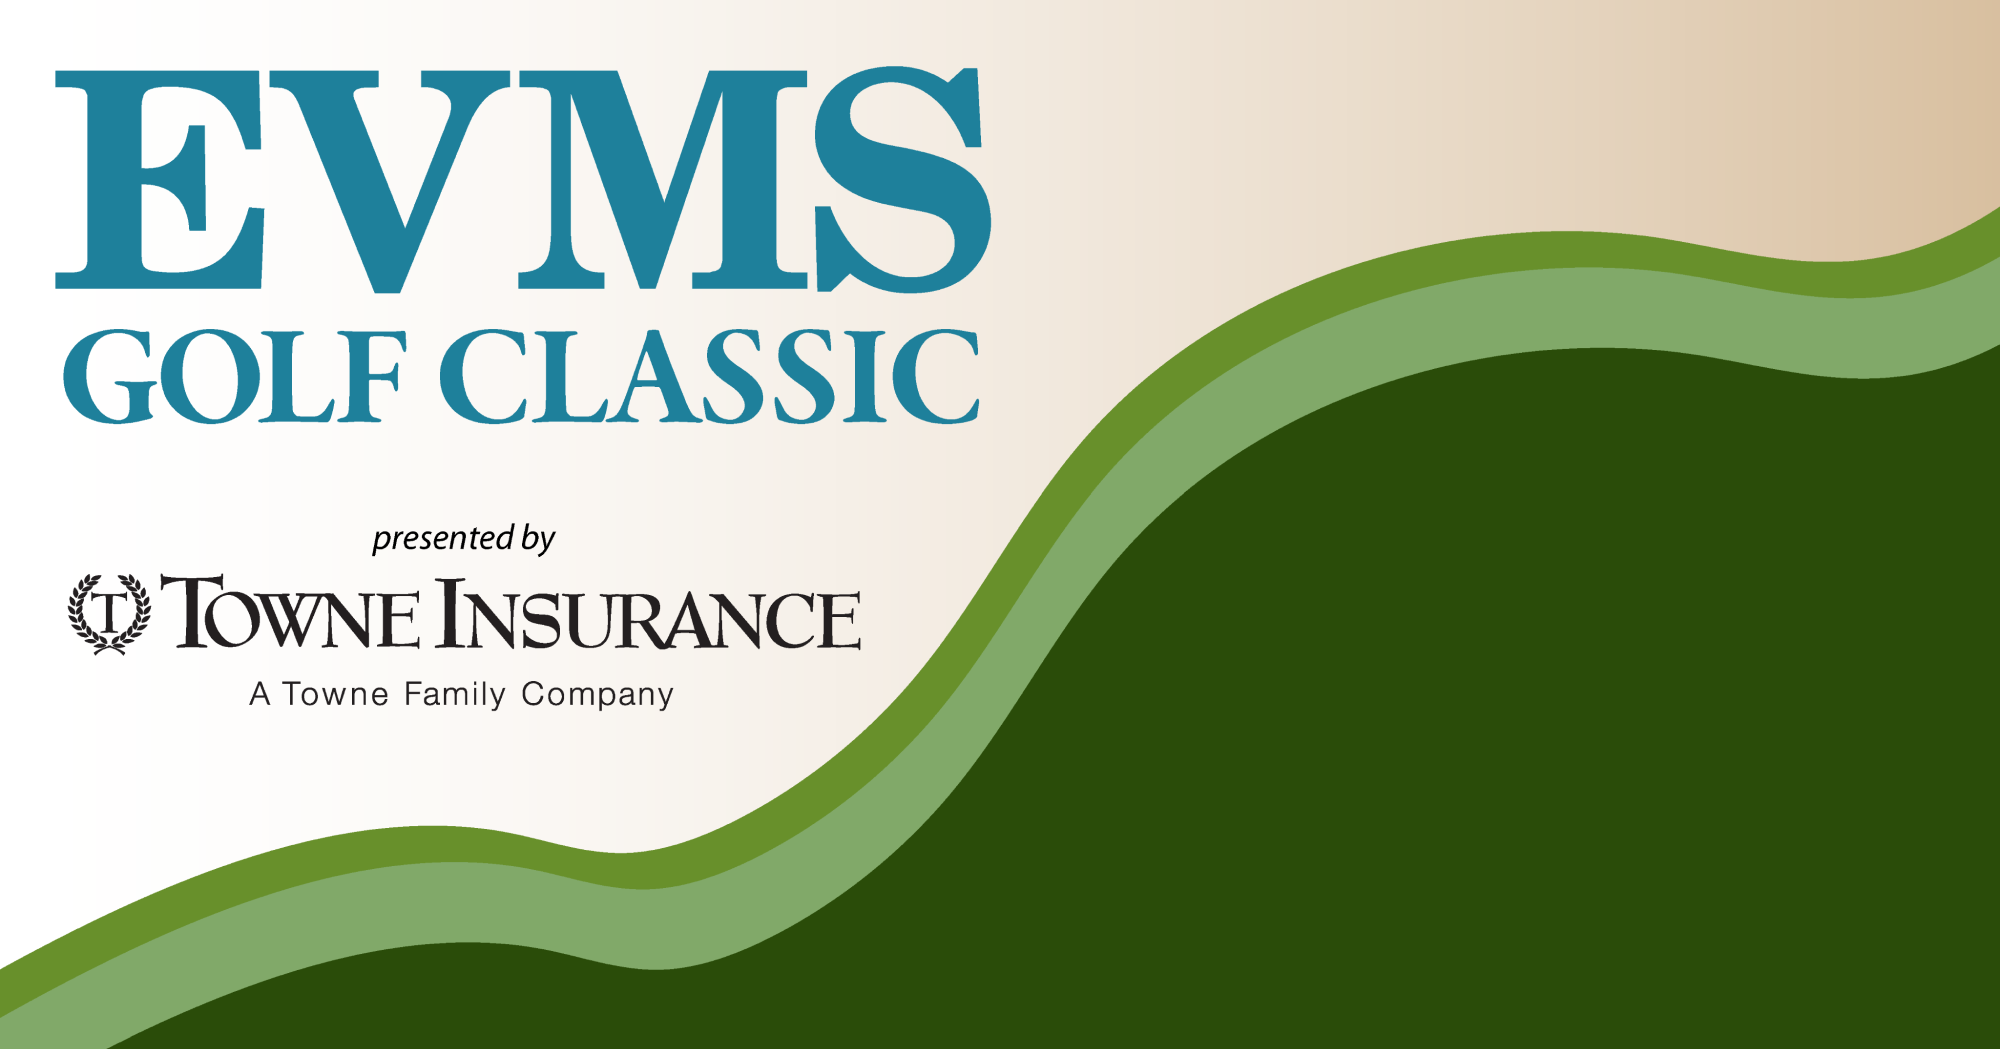 EVMS and Towne Insurance logo with green wavy background